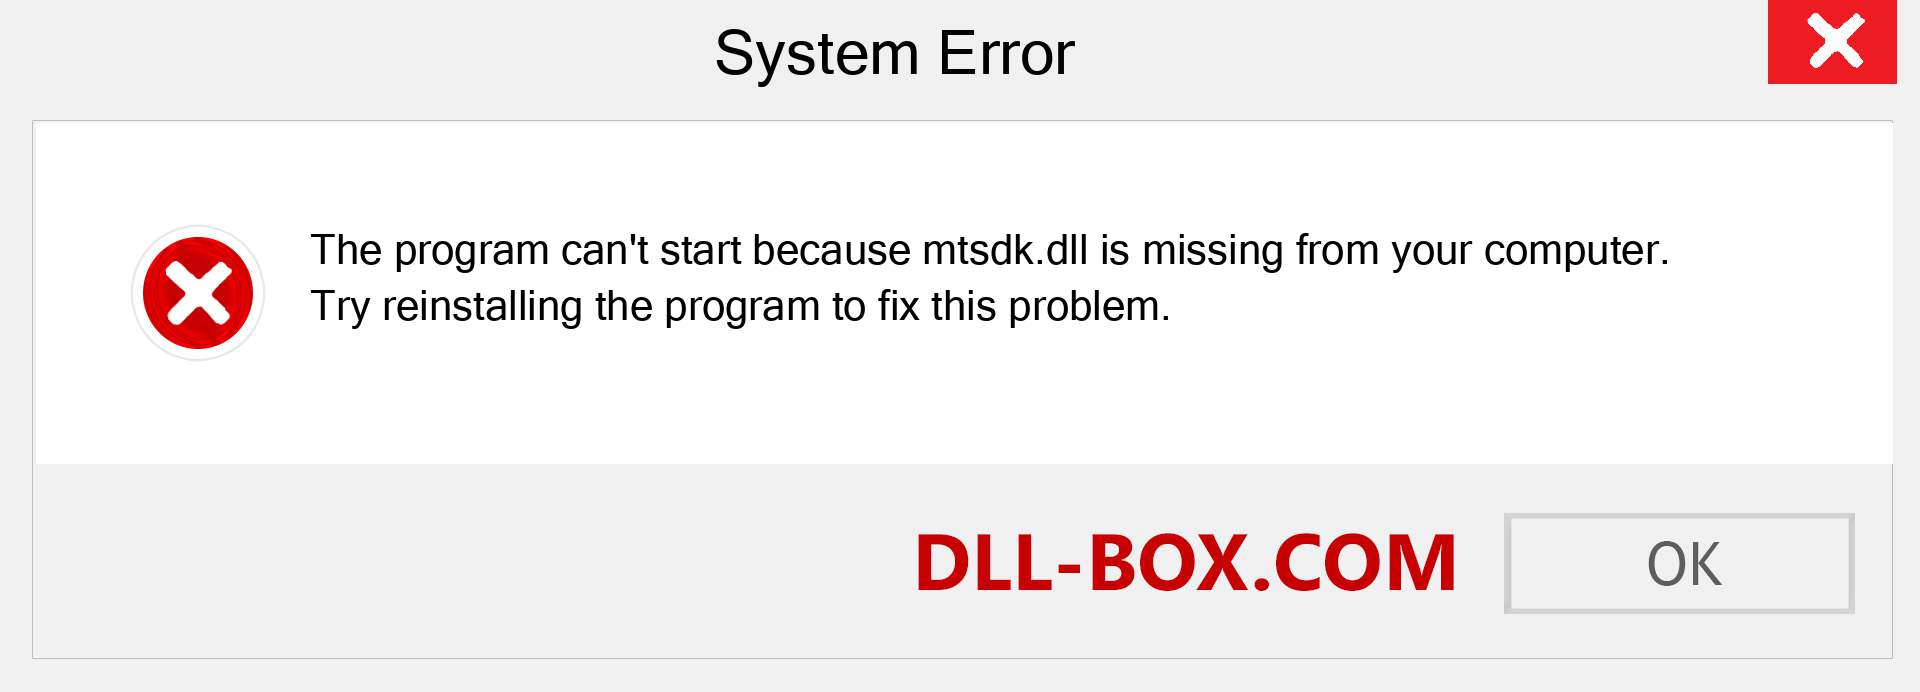  mtsdk.dll file is missing?. Download for Windows 7, 8, 10 - Fix  mtsdk dll Missing Error on Windows, photos, images